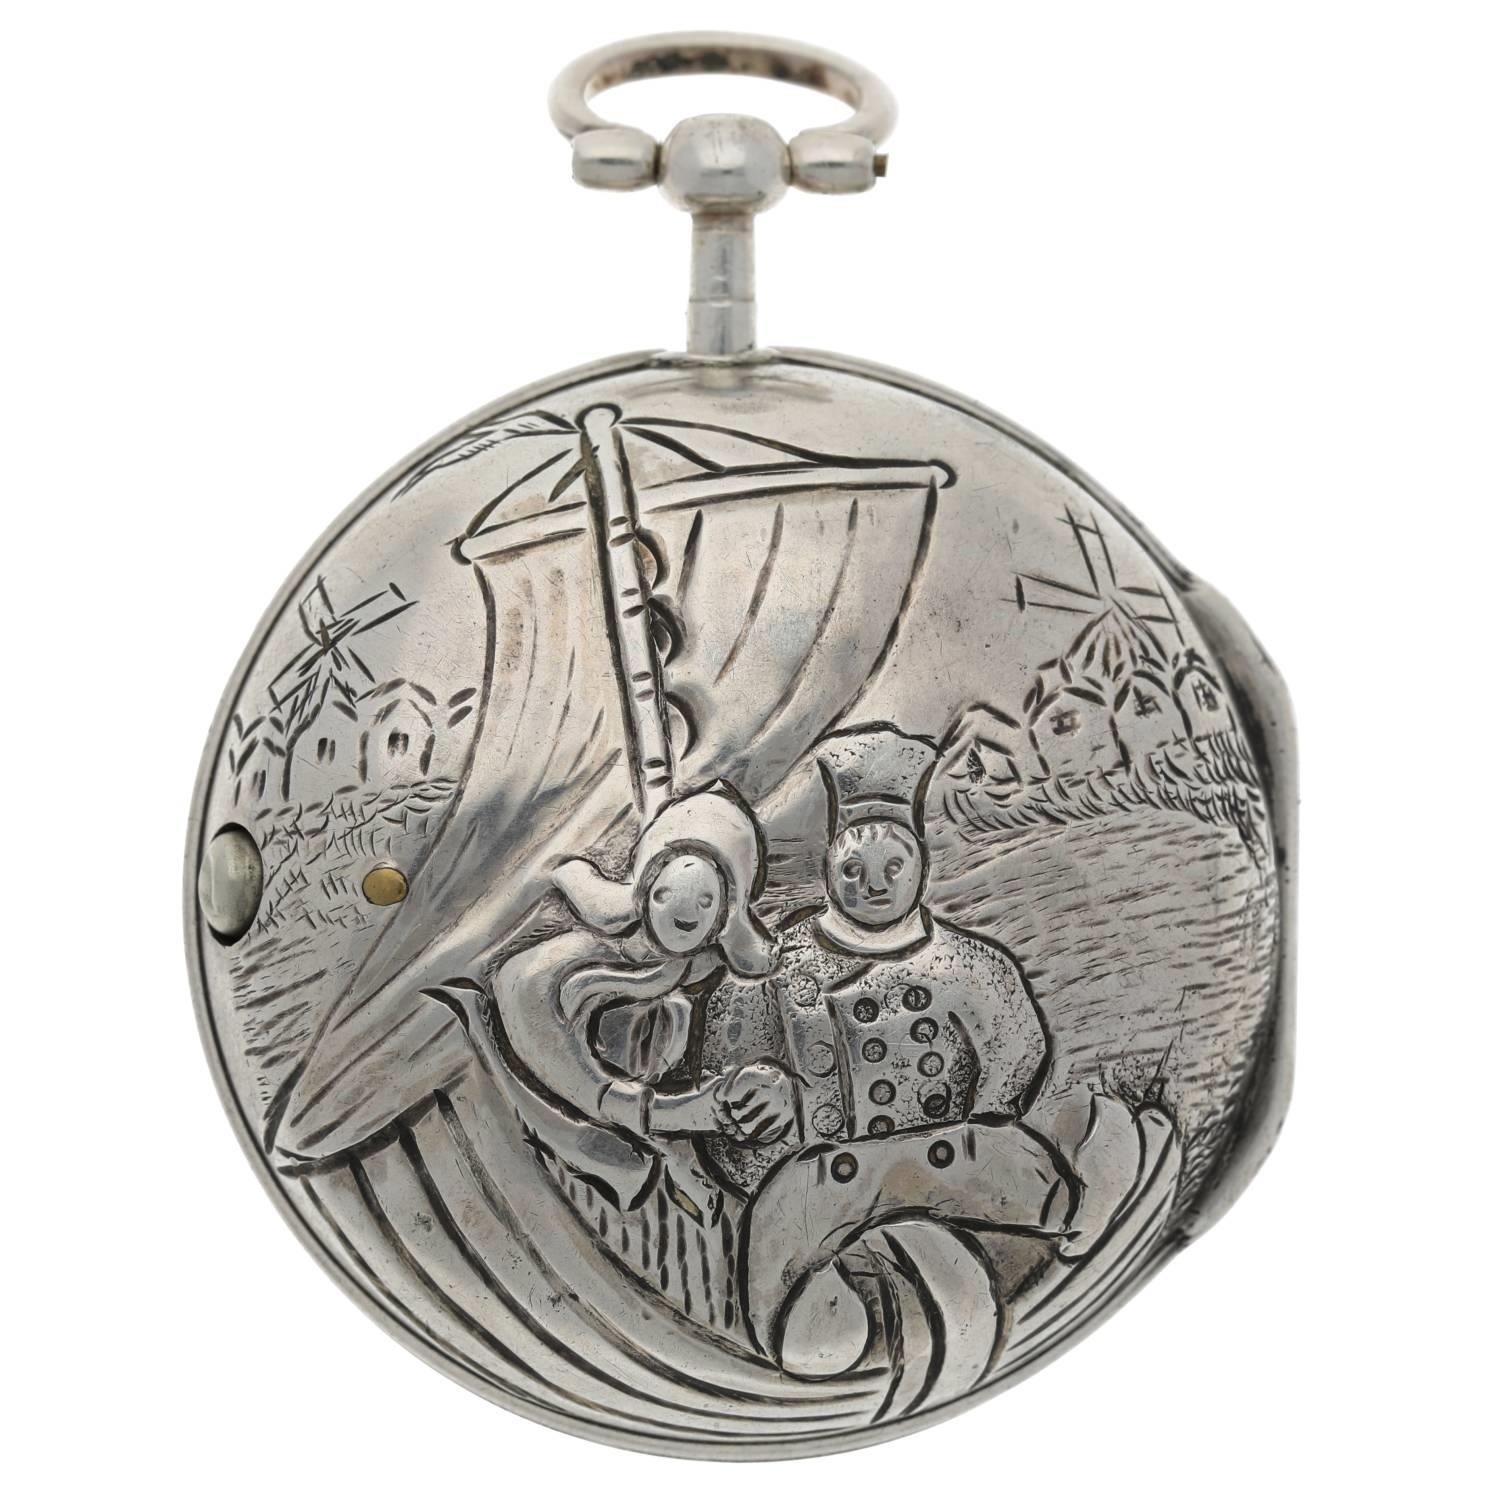 Nath'l Egdch, London - George III silver repoussé pair cased verge pocket watch for the Dutch - Image 8 of 10